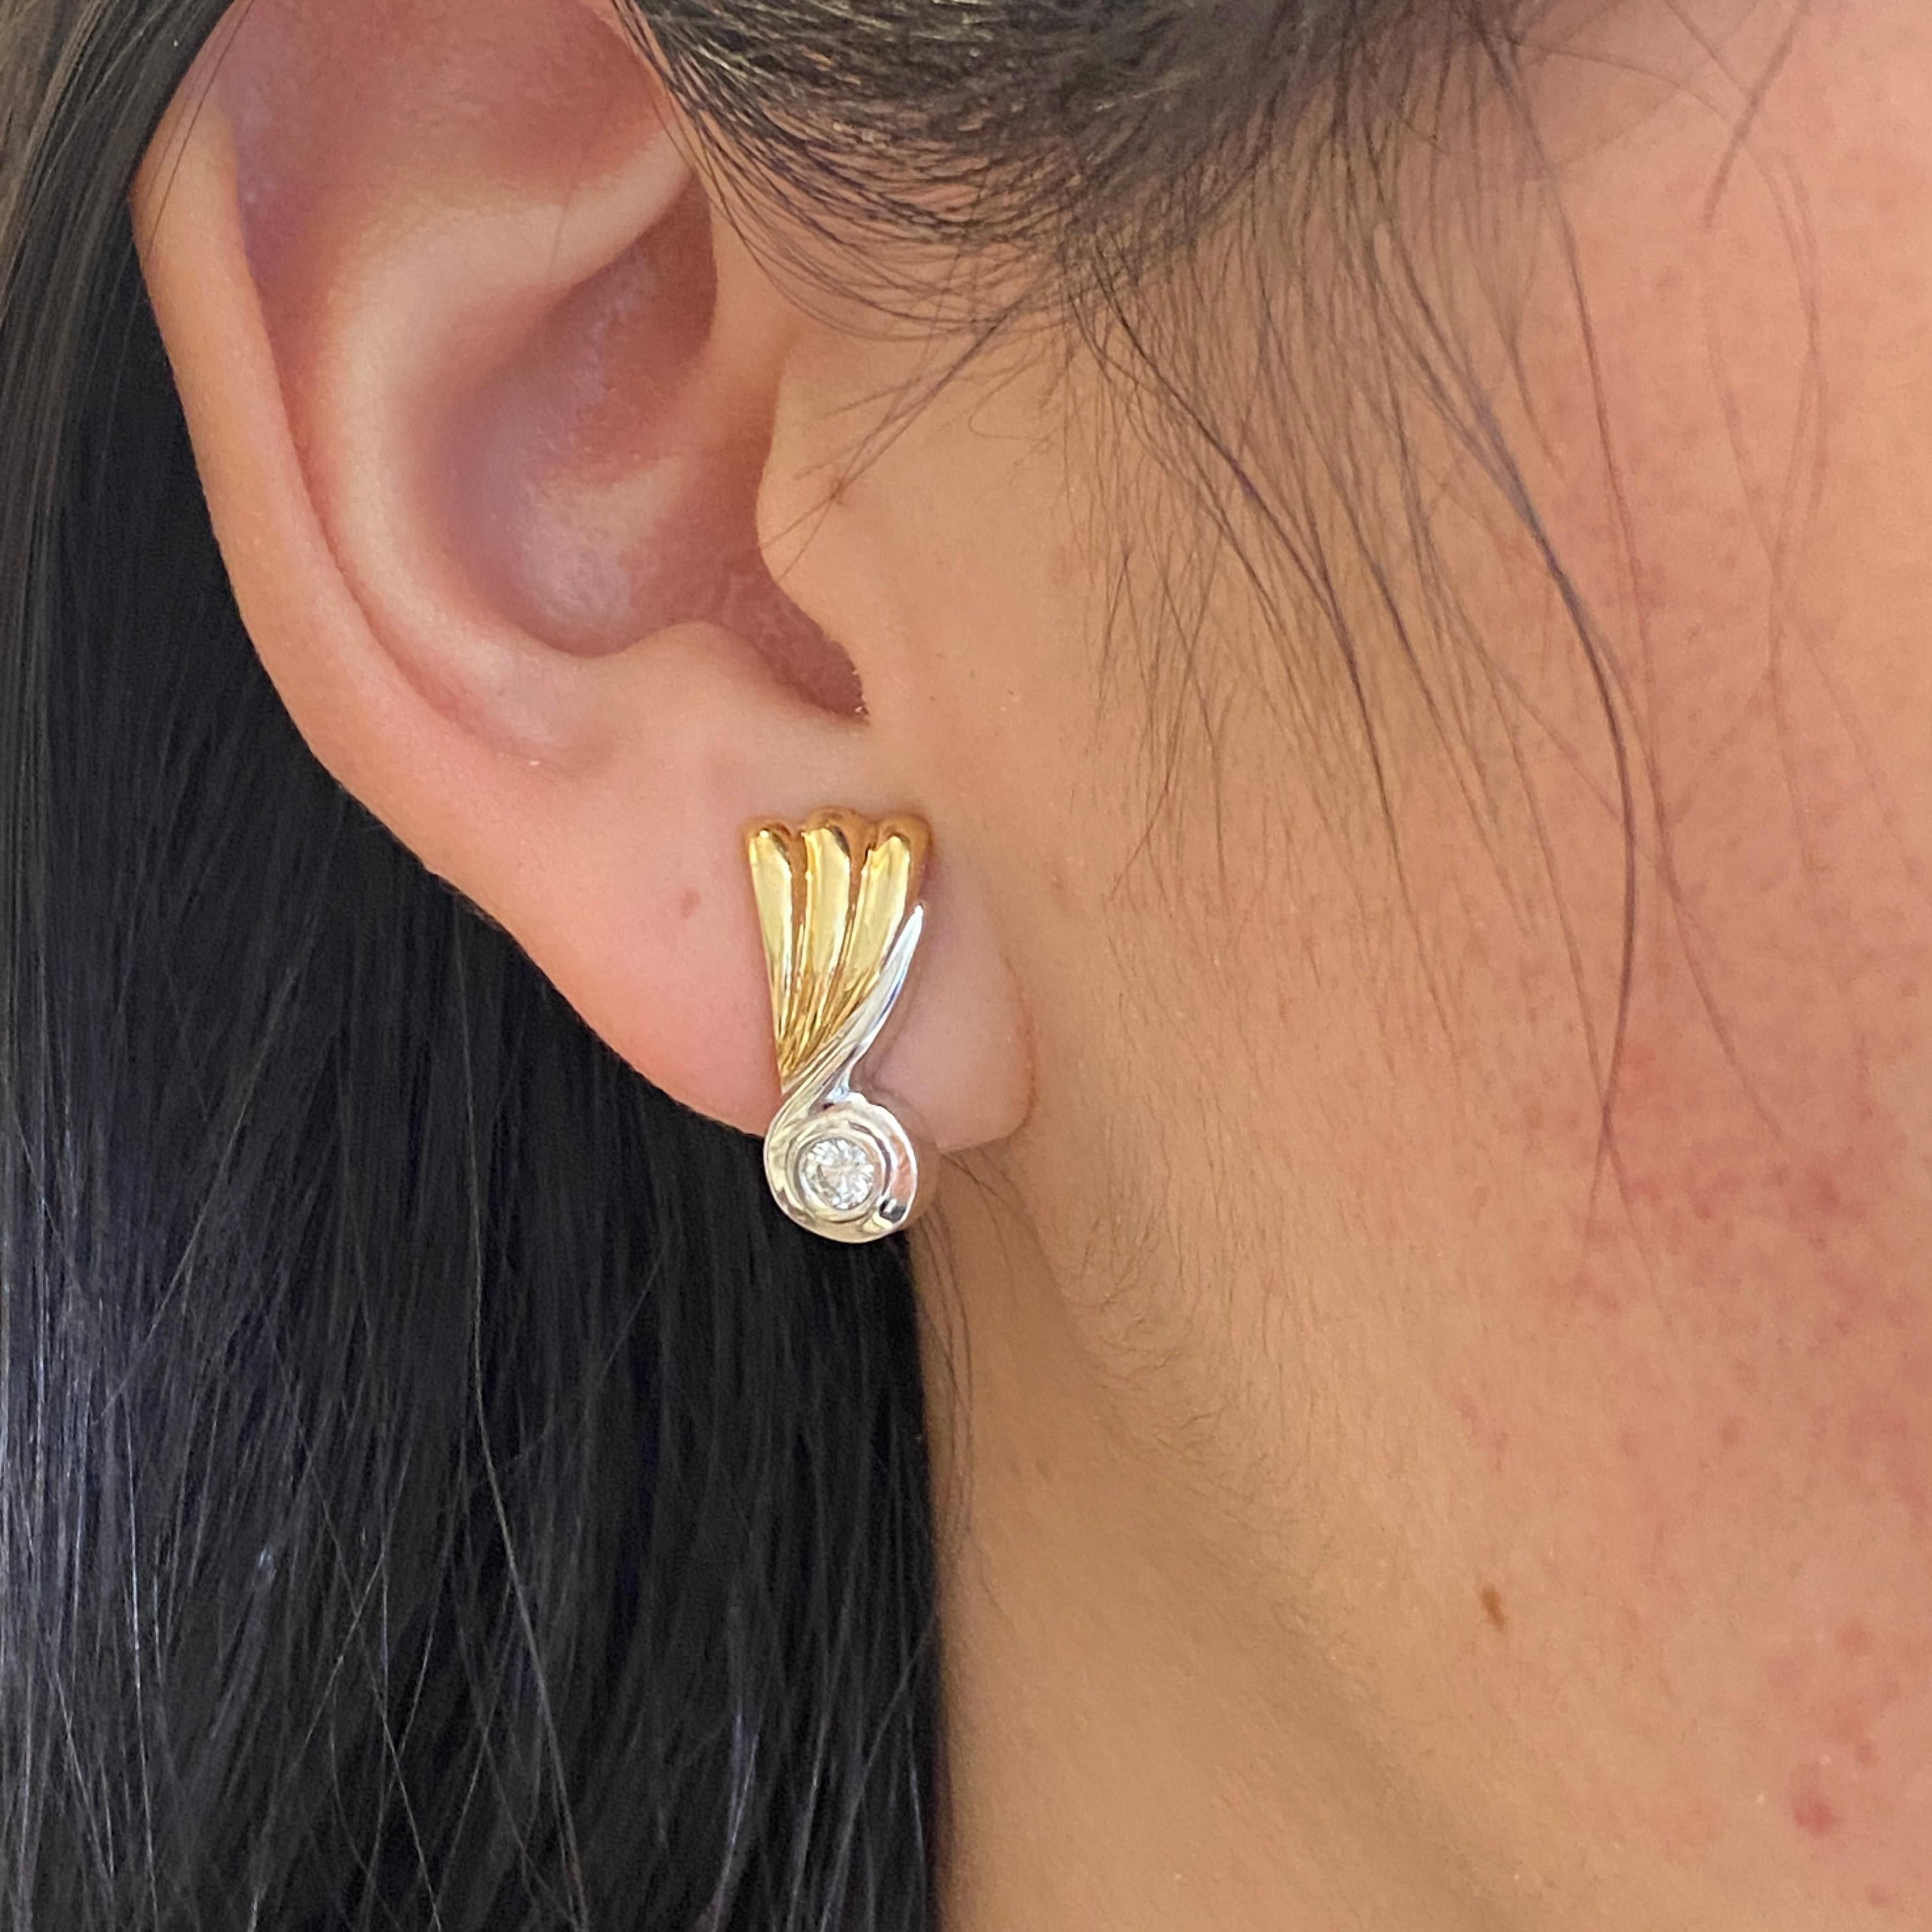 Add a a dash of retro flair to your day with these fabulous two-tone diamond earrings! A triple sweep of yellow gold fan-like ribs grace the top of these lovely earrings and nestle against a flaring line of white gold that sweeps down to curve